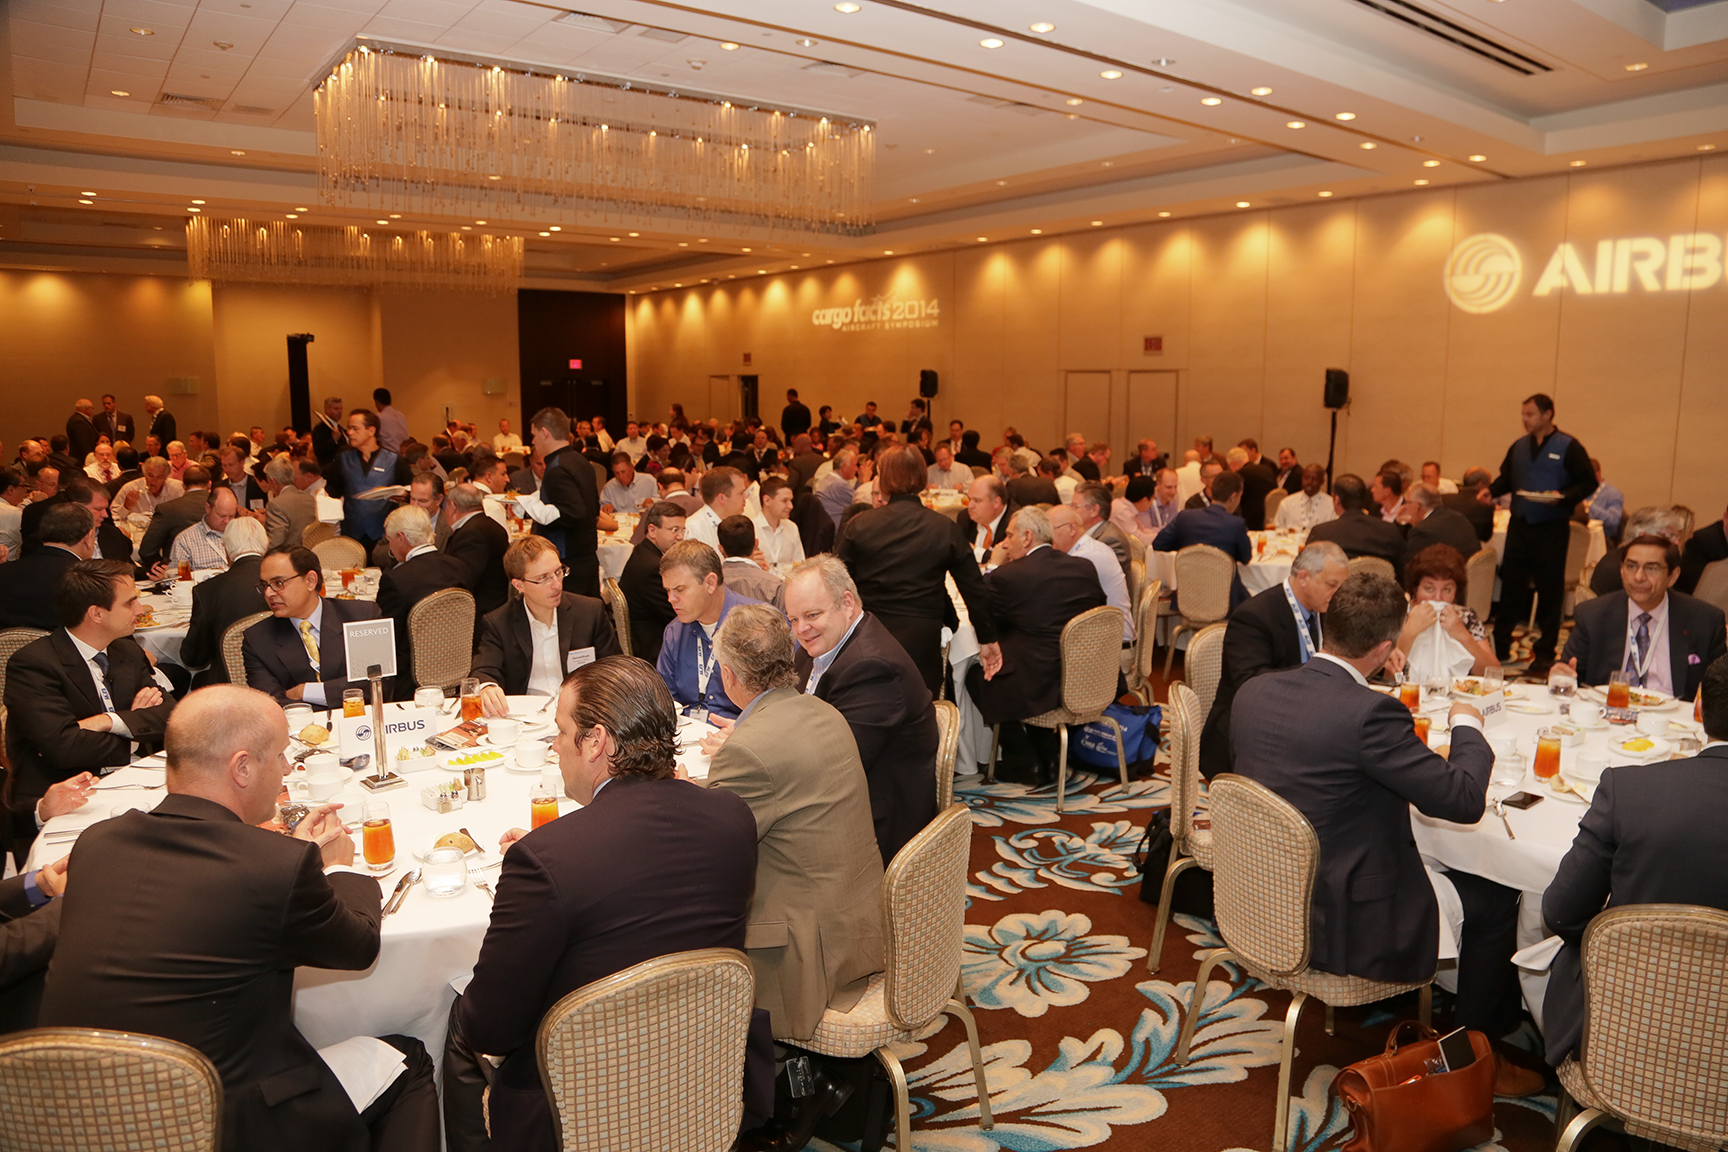 Delegates enjoying a meal at the 2014 edition of the Cargo Facts Symposium